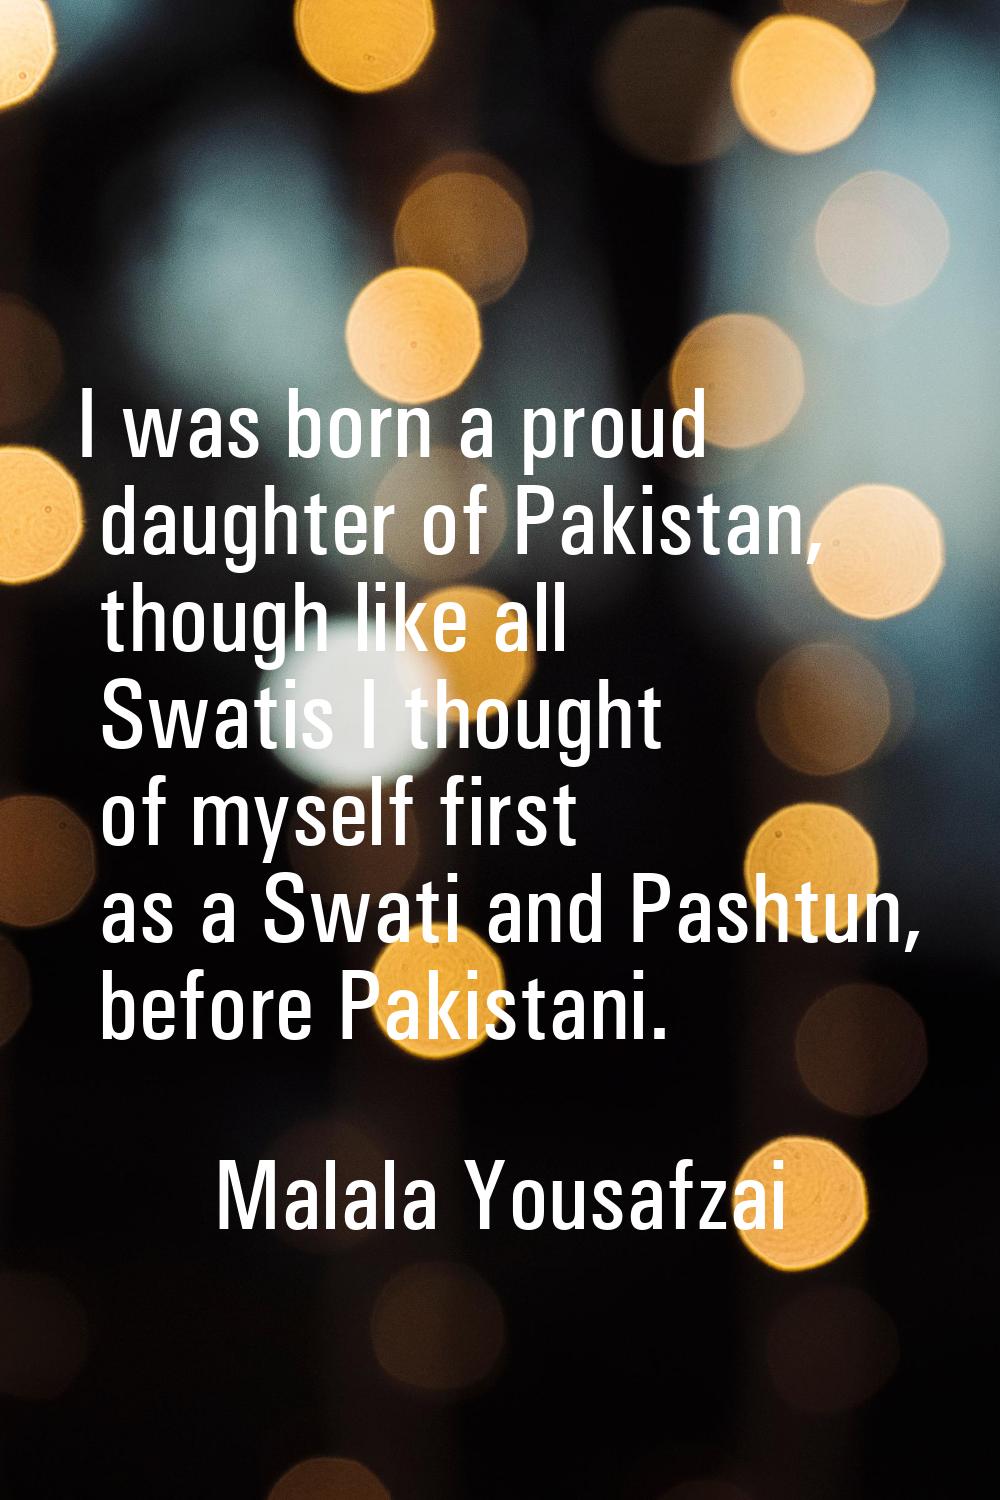 I was born a proud daughter of Pakistan, though like all Swatis I thought of myself first as a Swat